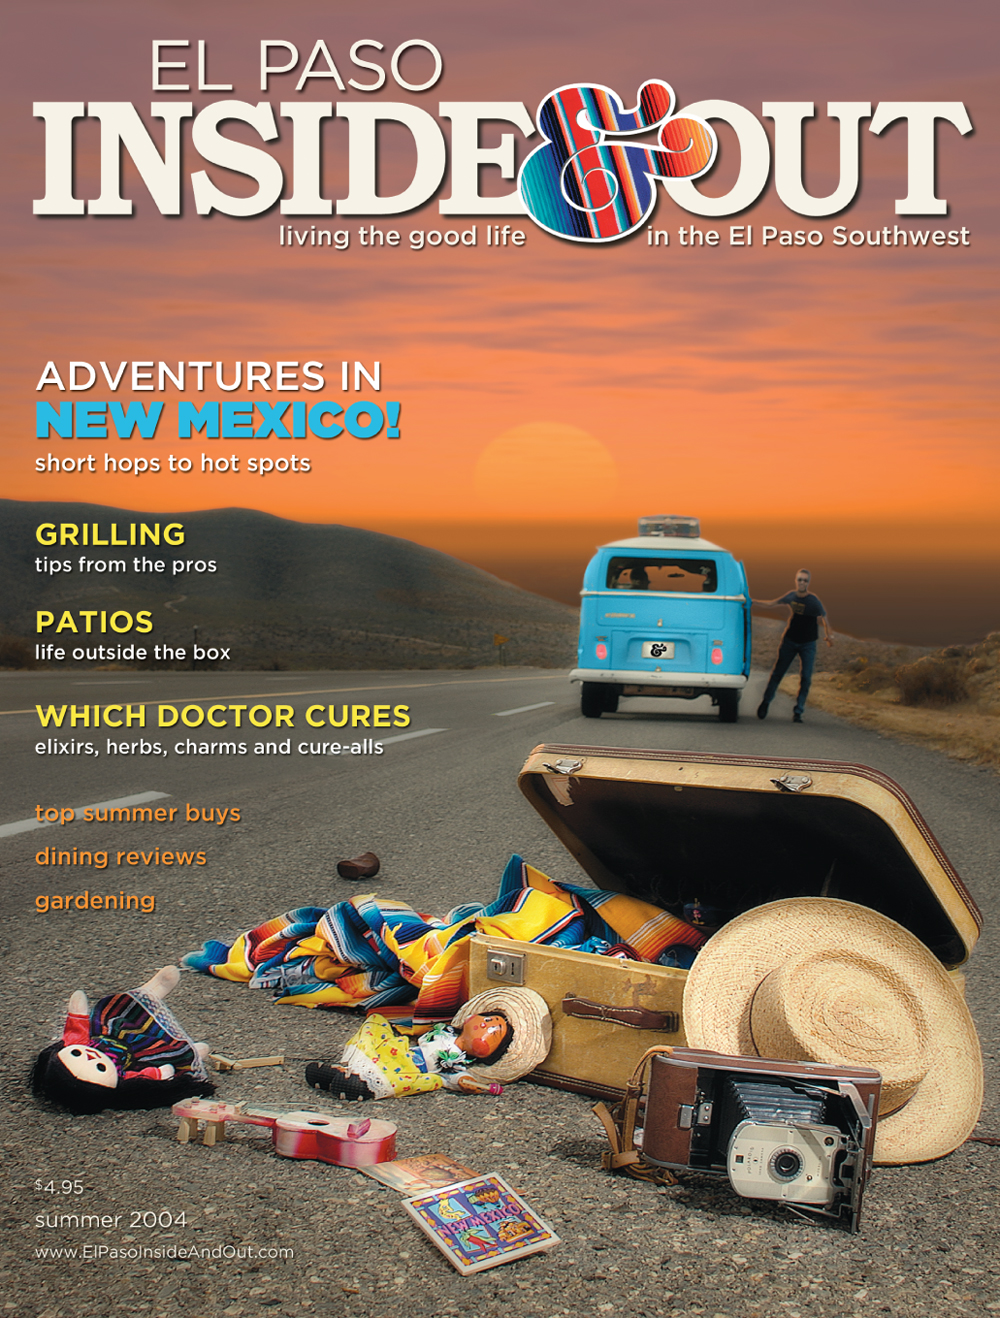  Inside &amp; Out was the brainchild of my client, publisher Don Baumgardt. &nbsp;He wanted to produce a great local flavor magazine with wonderful and unique content. &nbsp;We produced five issues before it became too expensive to produce...it was a